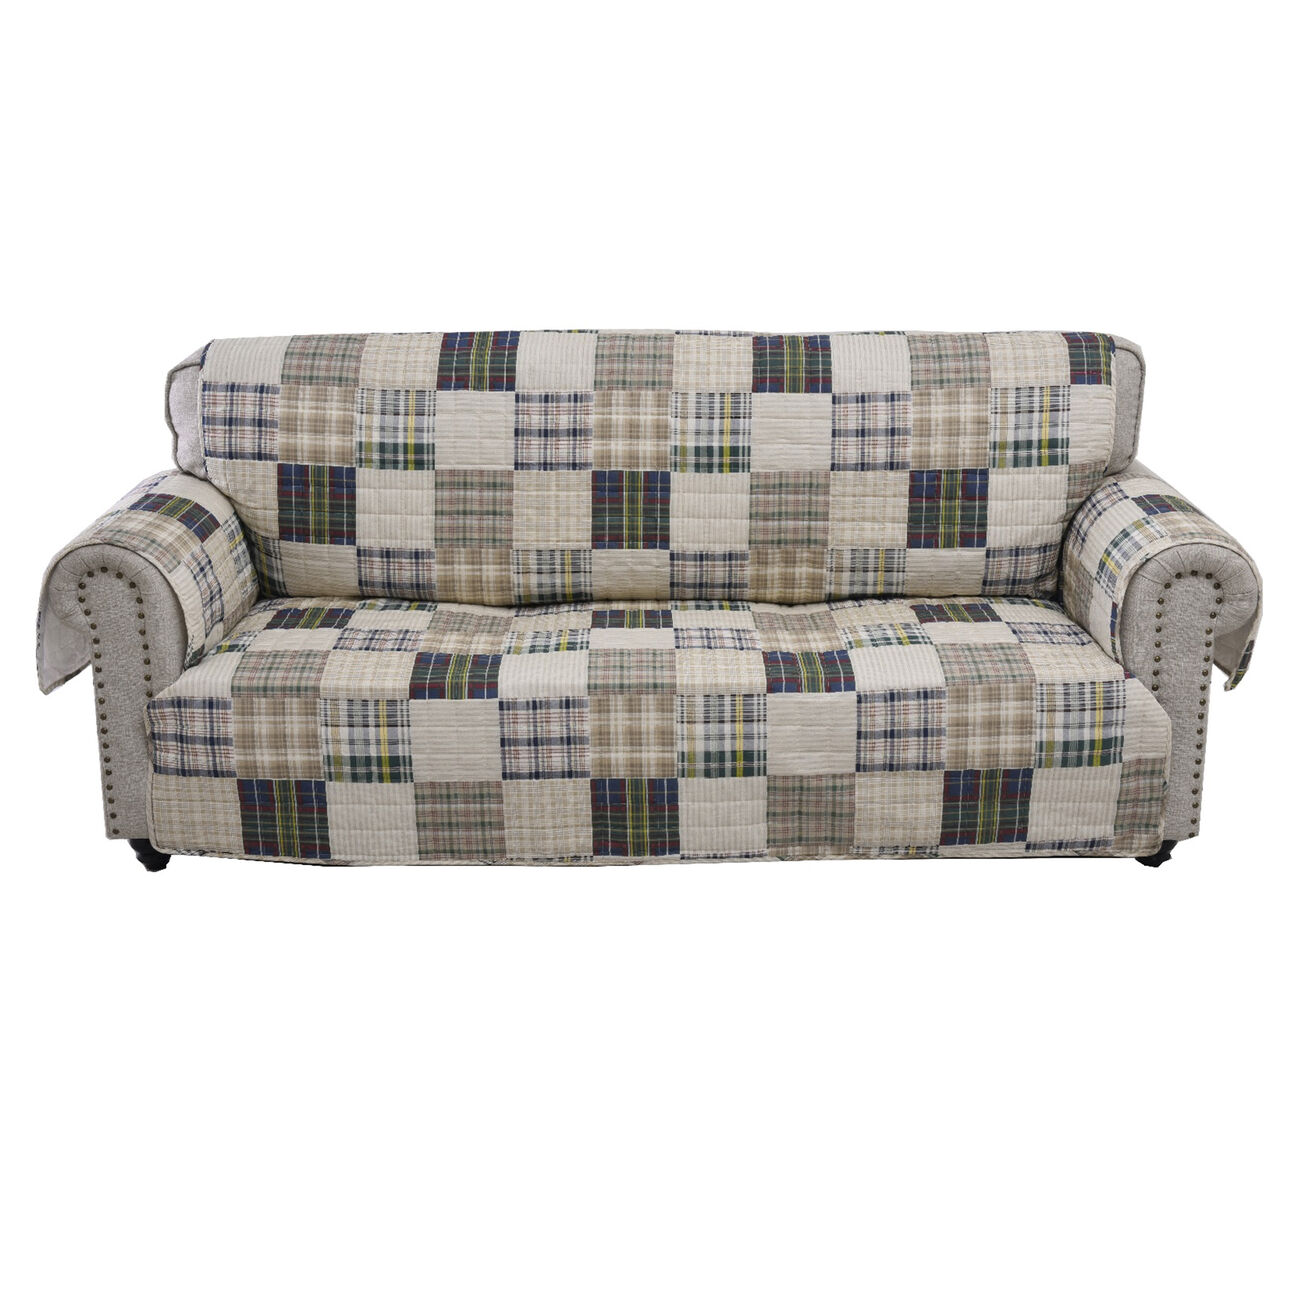 Waterproof Lining Sofa Protector with Plaid Square Design, Multicolor - BM223410